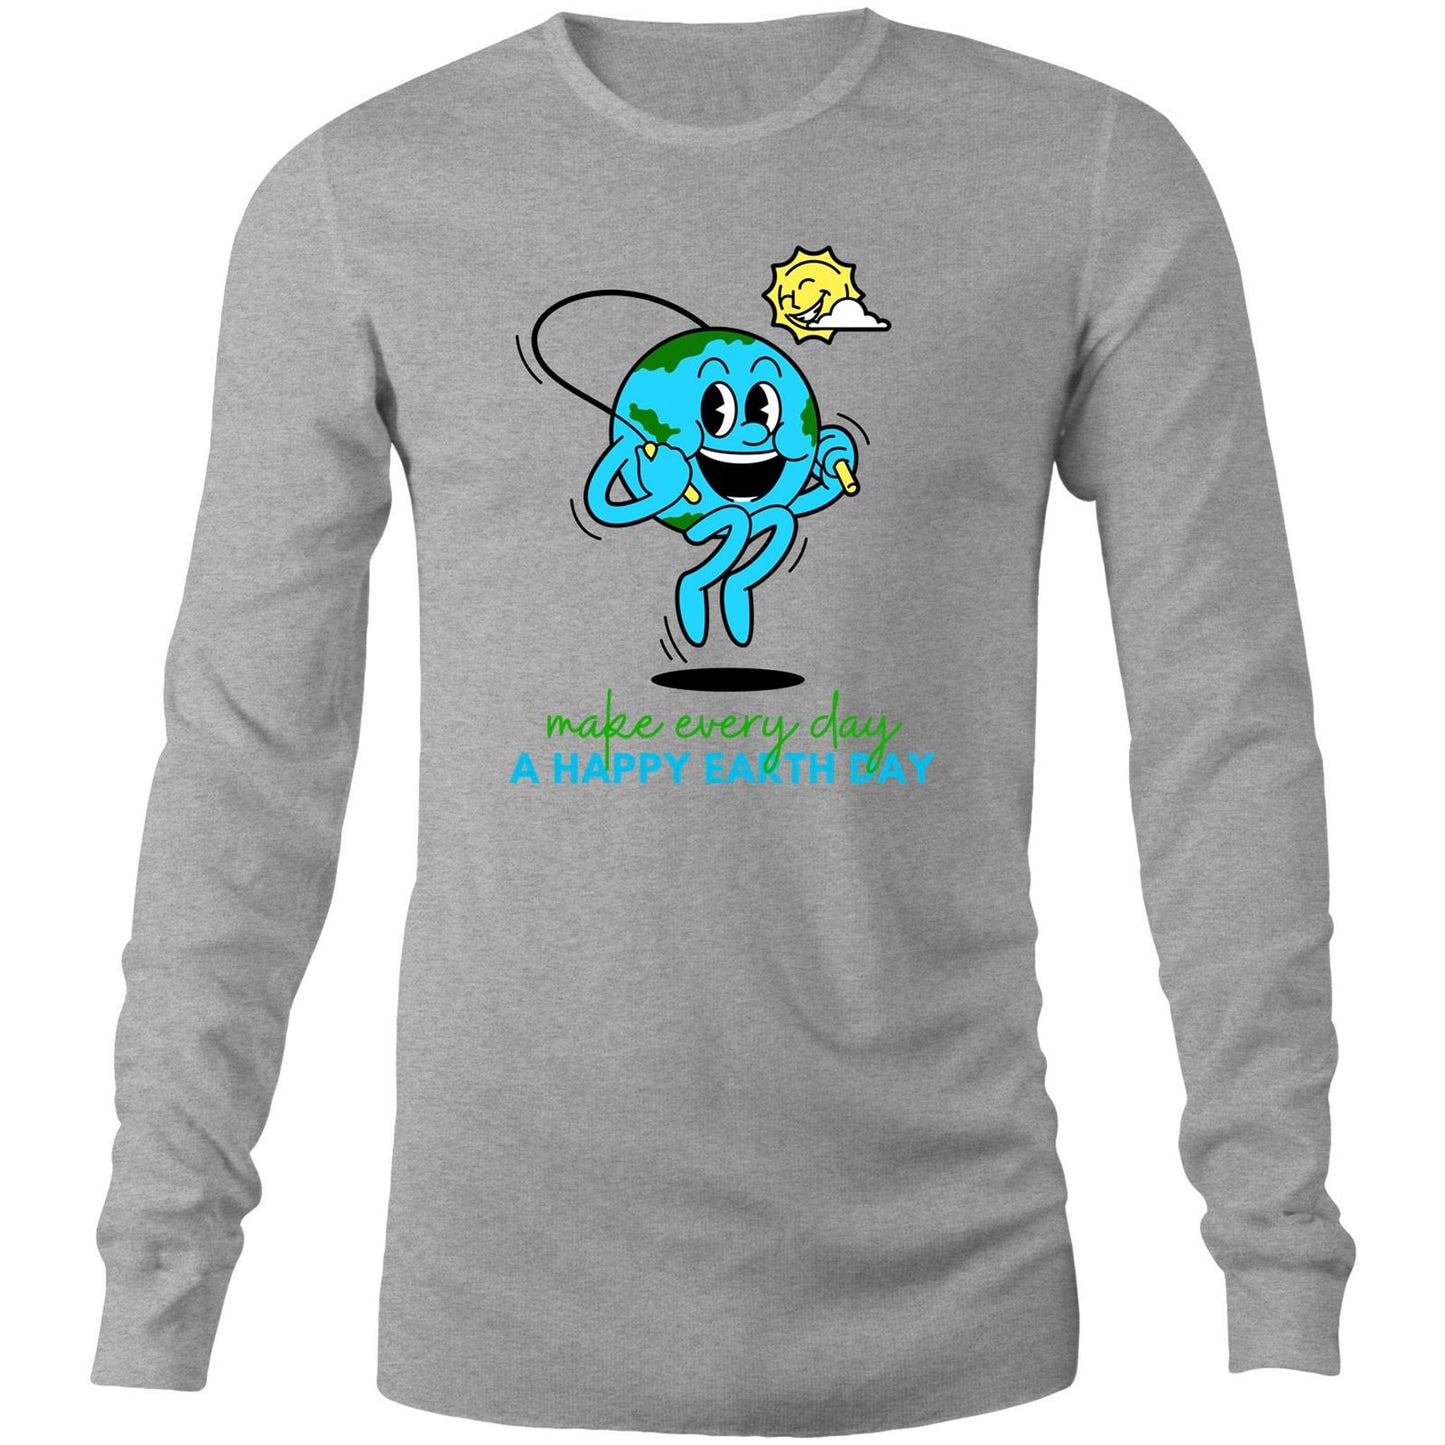 Make Every Day A Happy Earth Day - Long Sleeve T-Shirt Grey Marle Unisex Long Sleeve T-shirt Environment